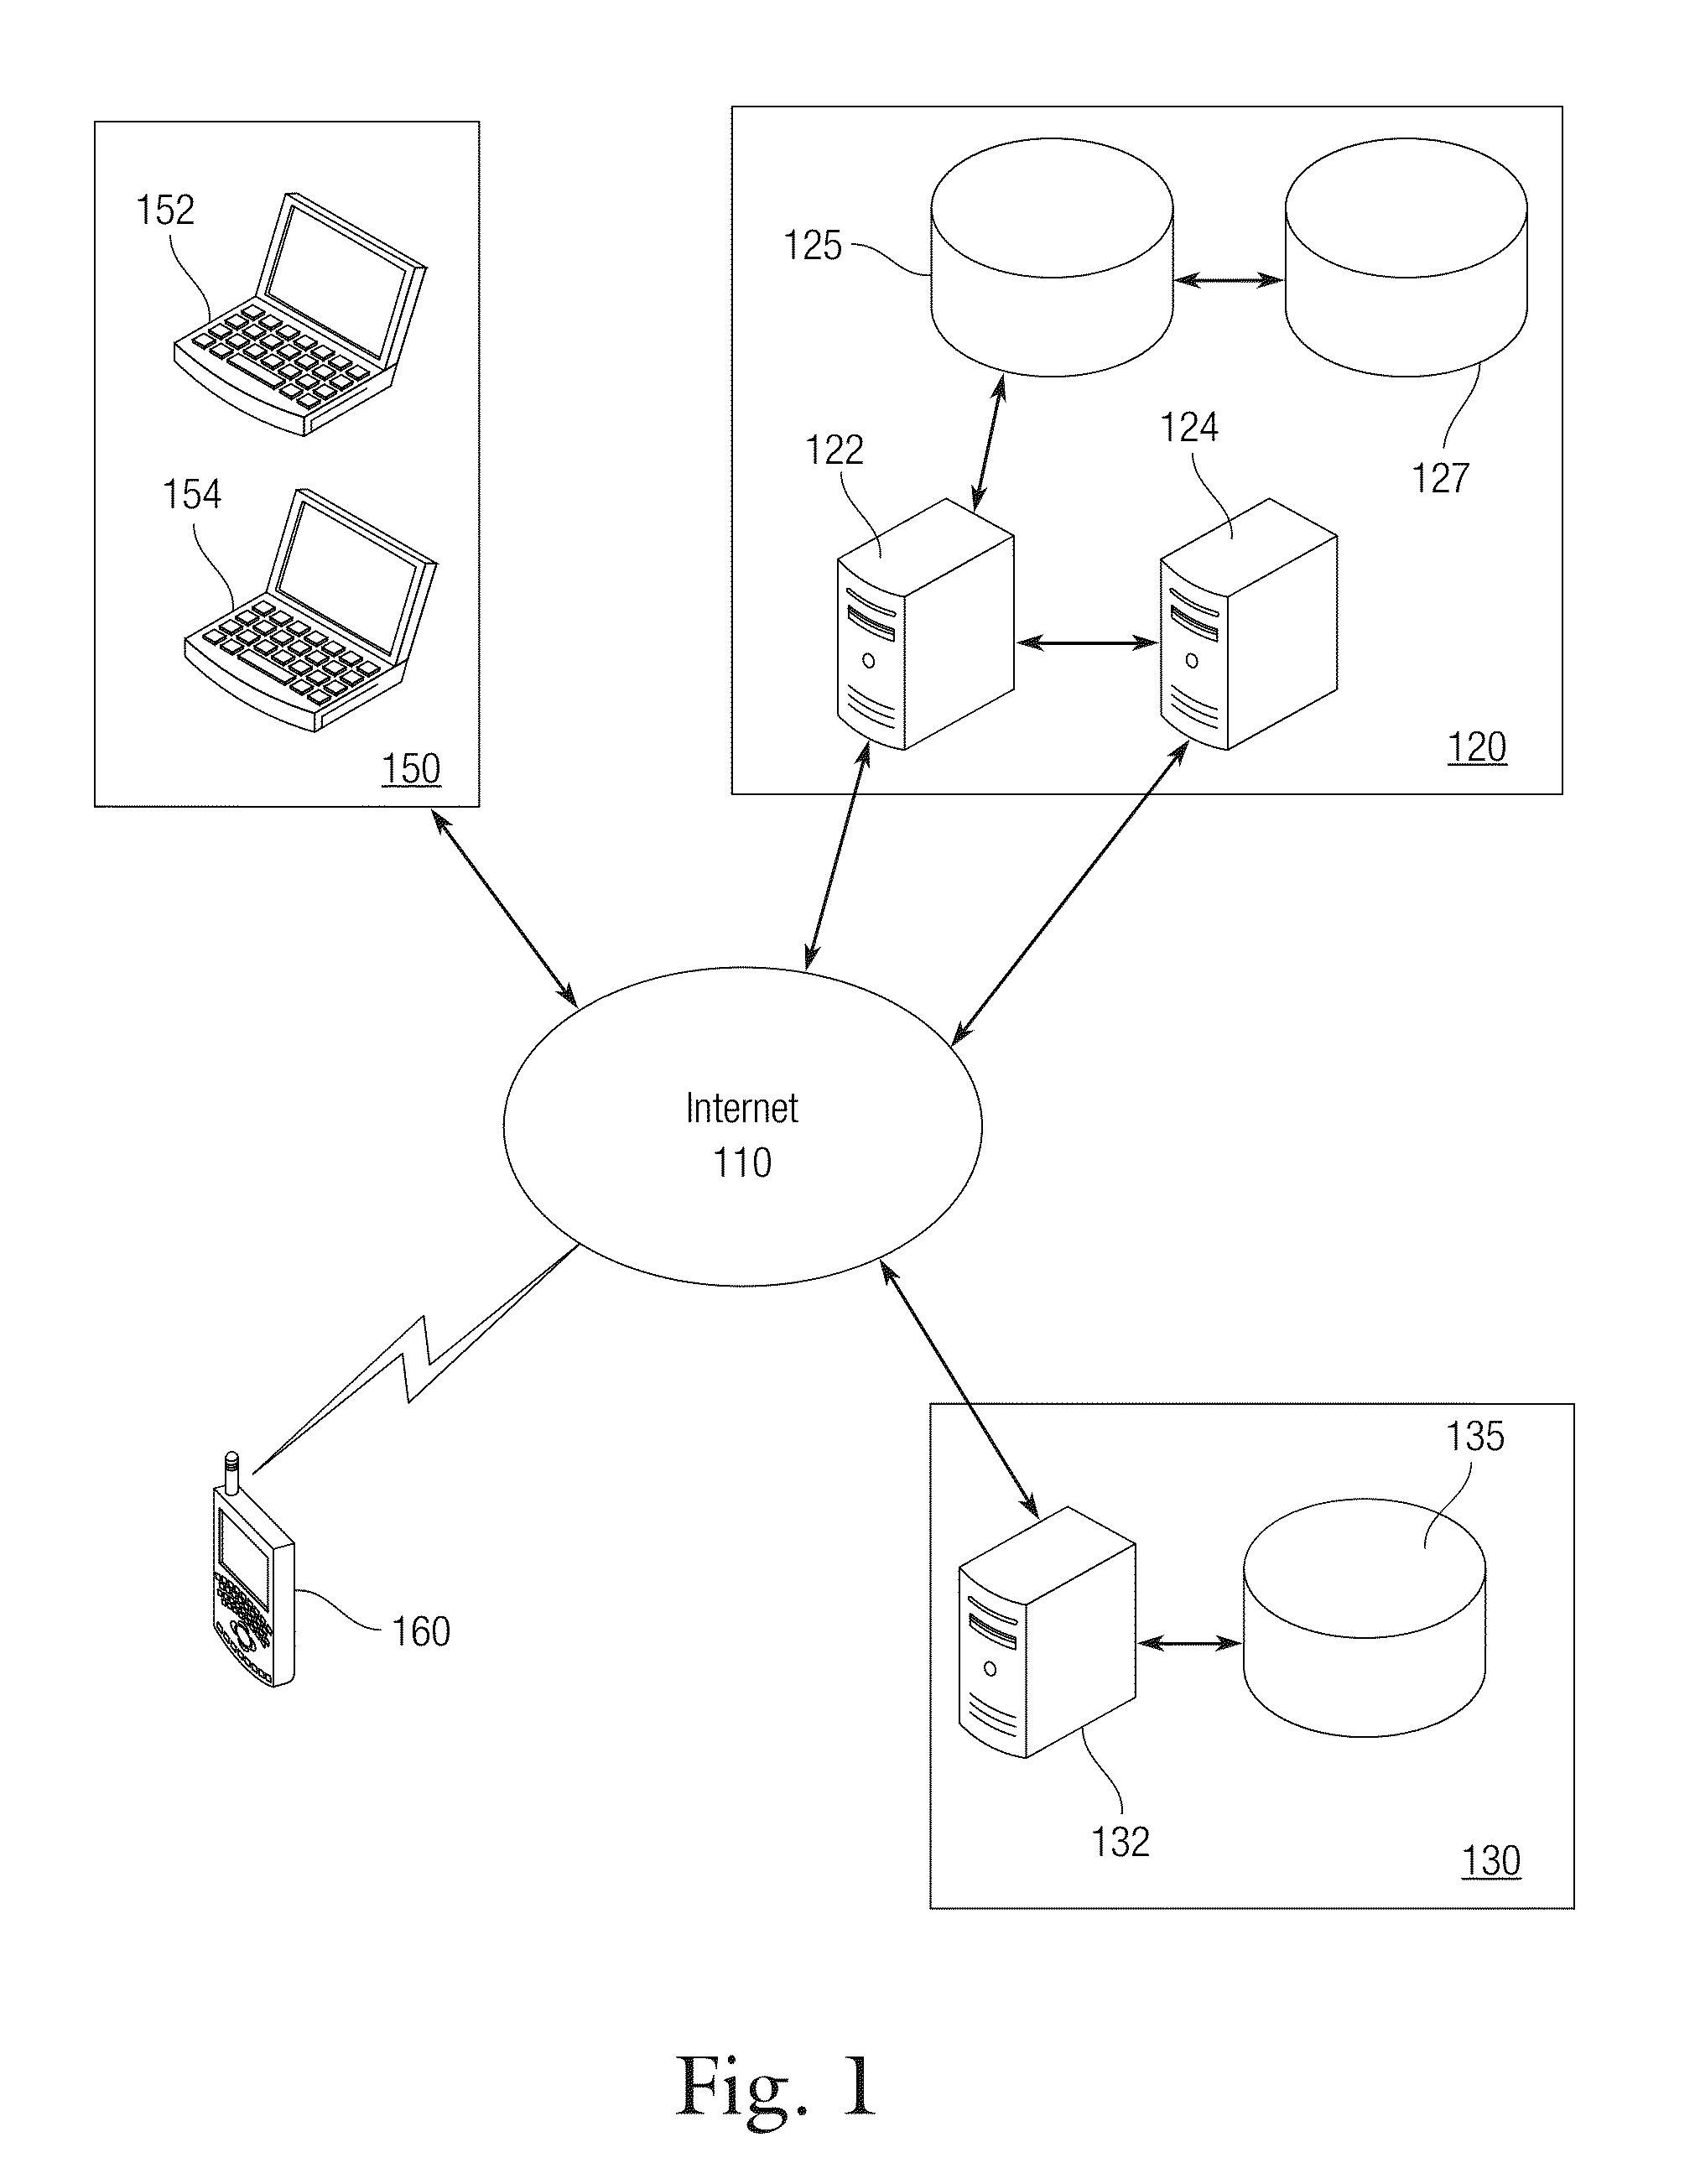 System and Methods for Managing Patients and Services